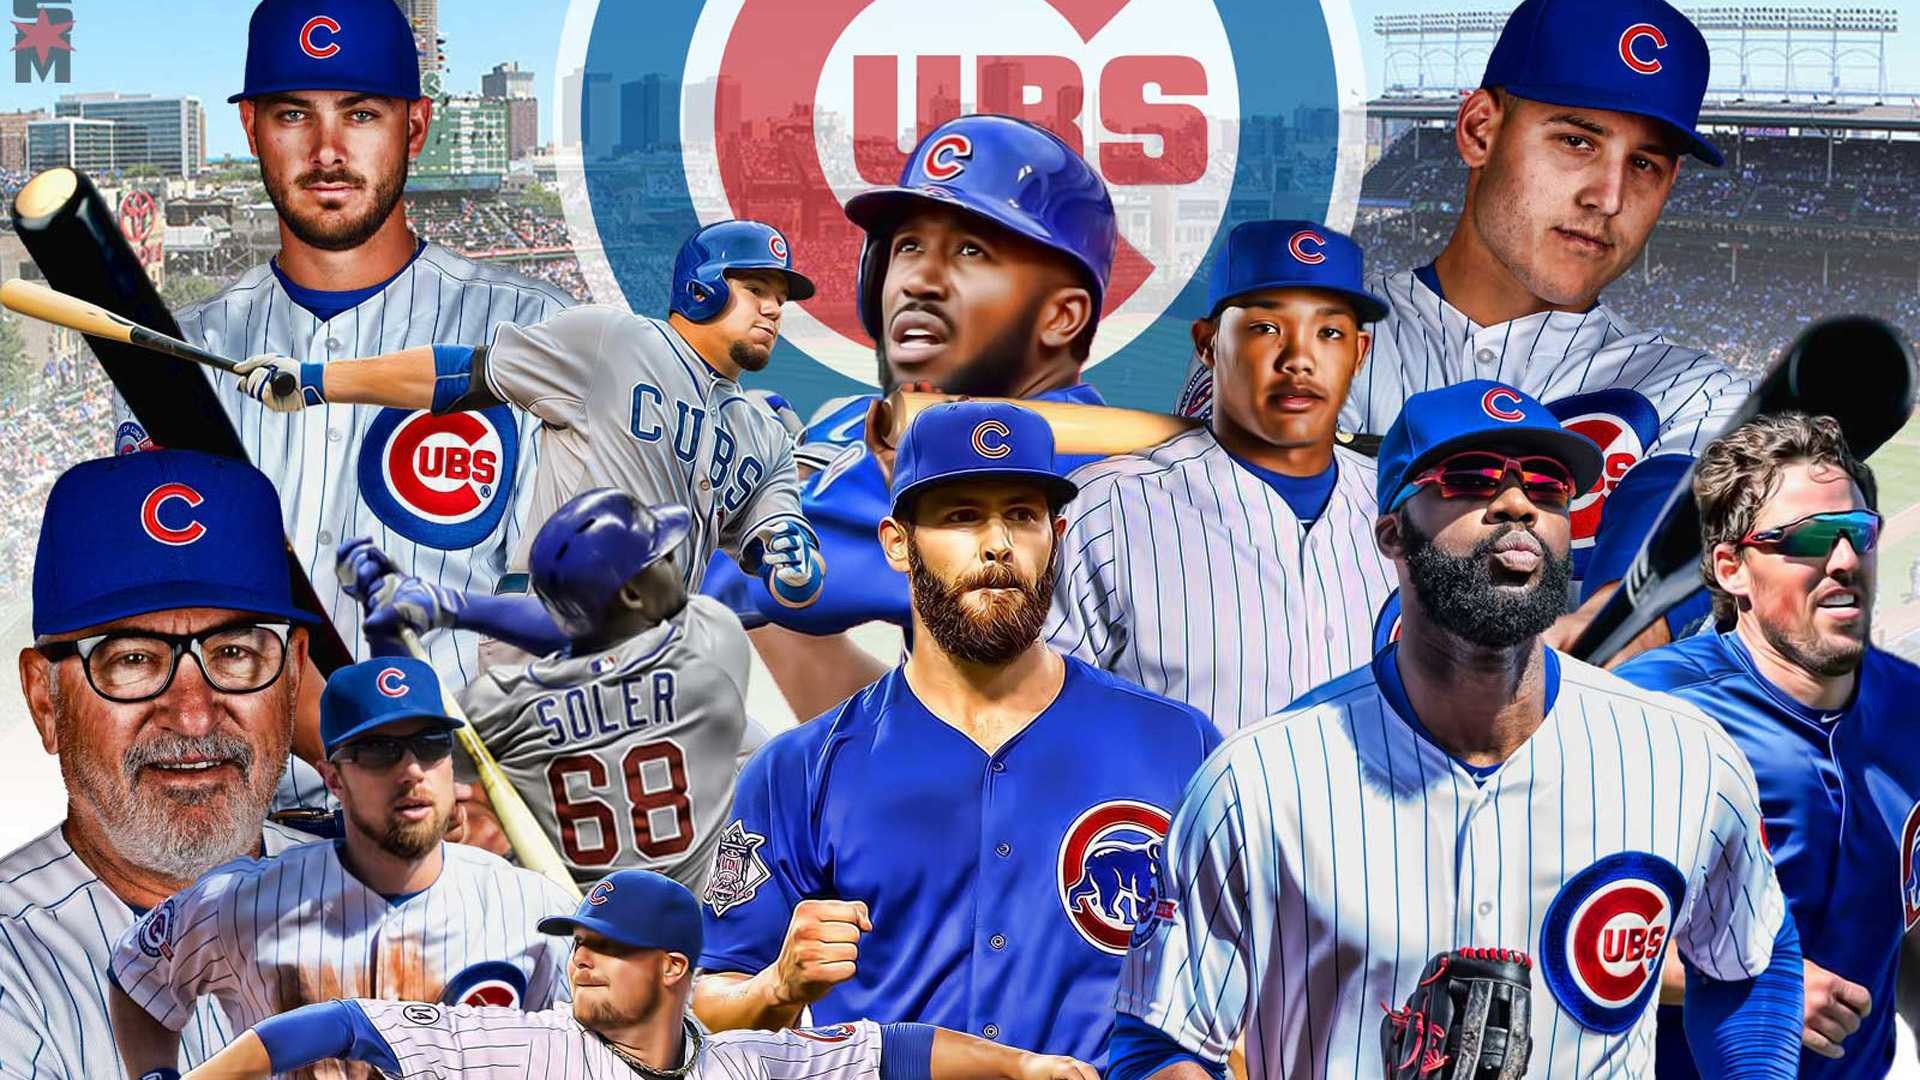 1920x1080 excellent chicago cubs wallpaper - photo #14. The Purple Quill : What to  look for in the MLB